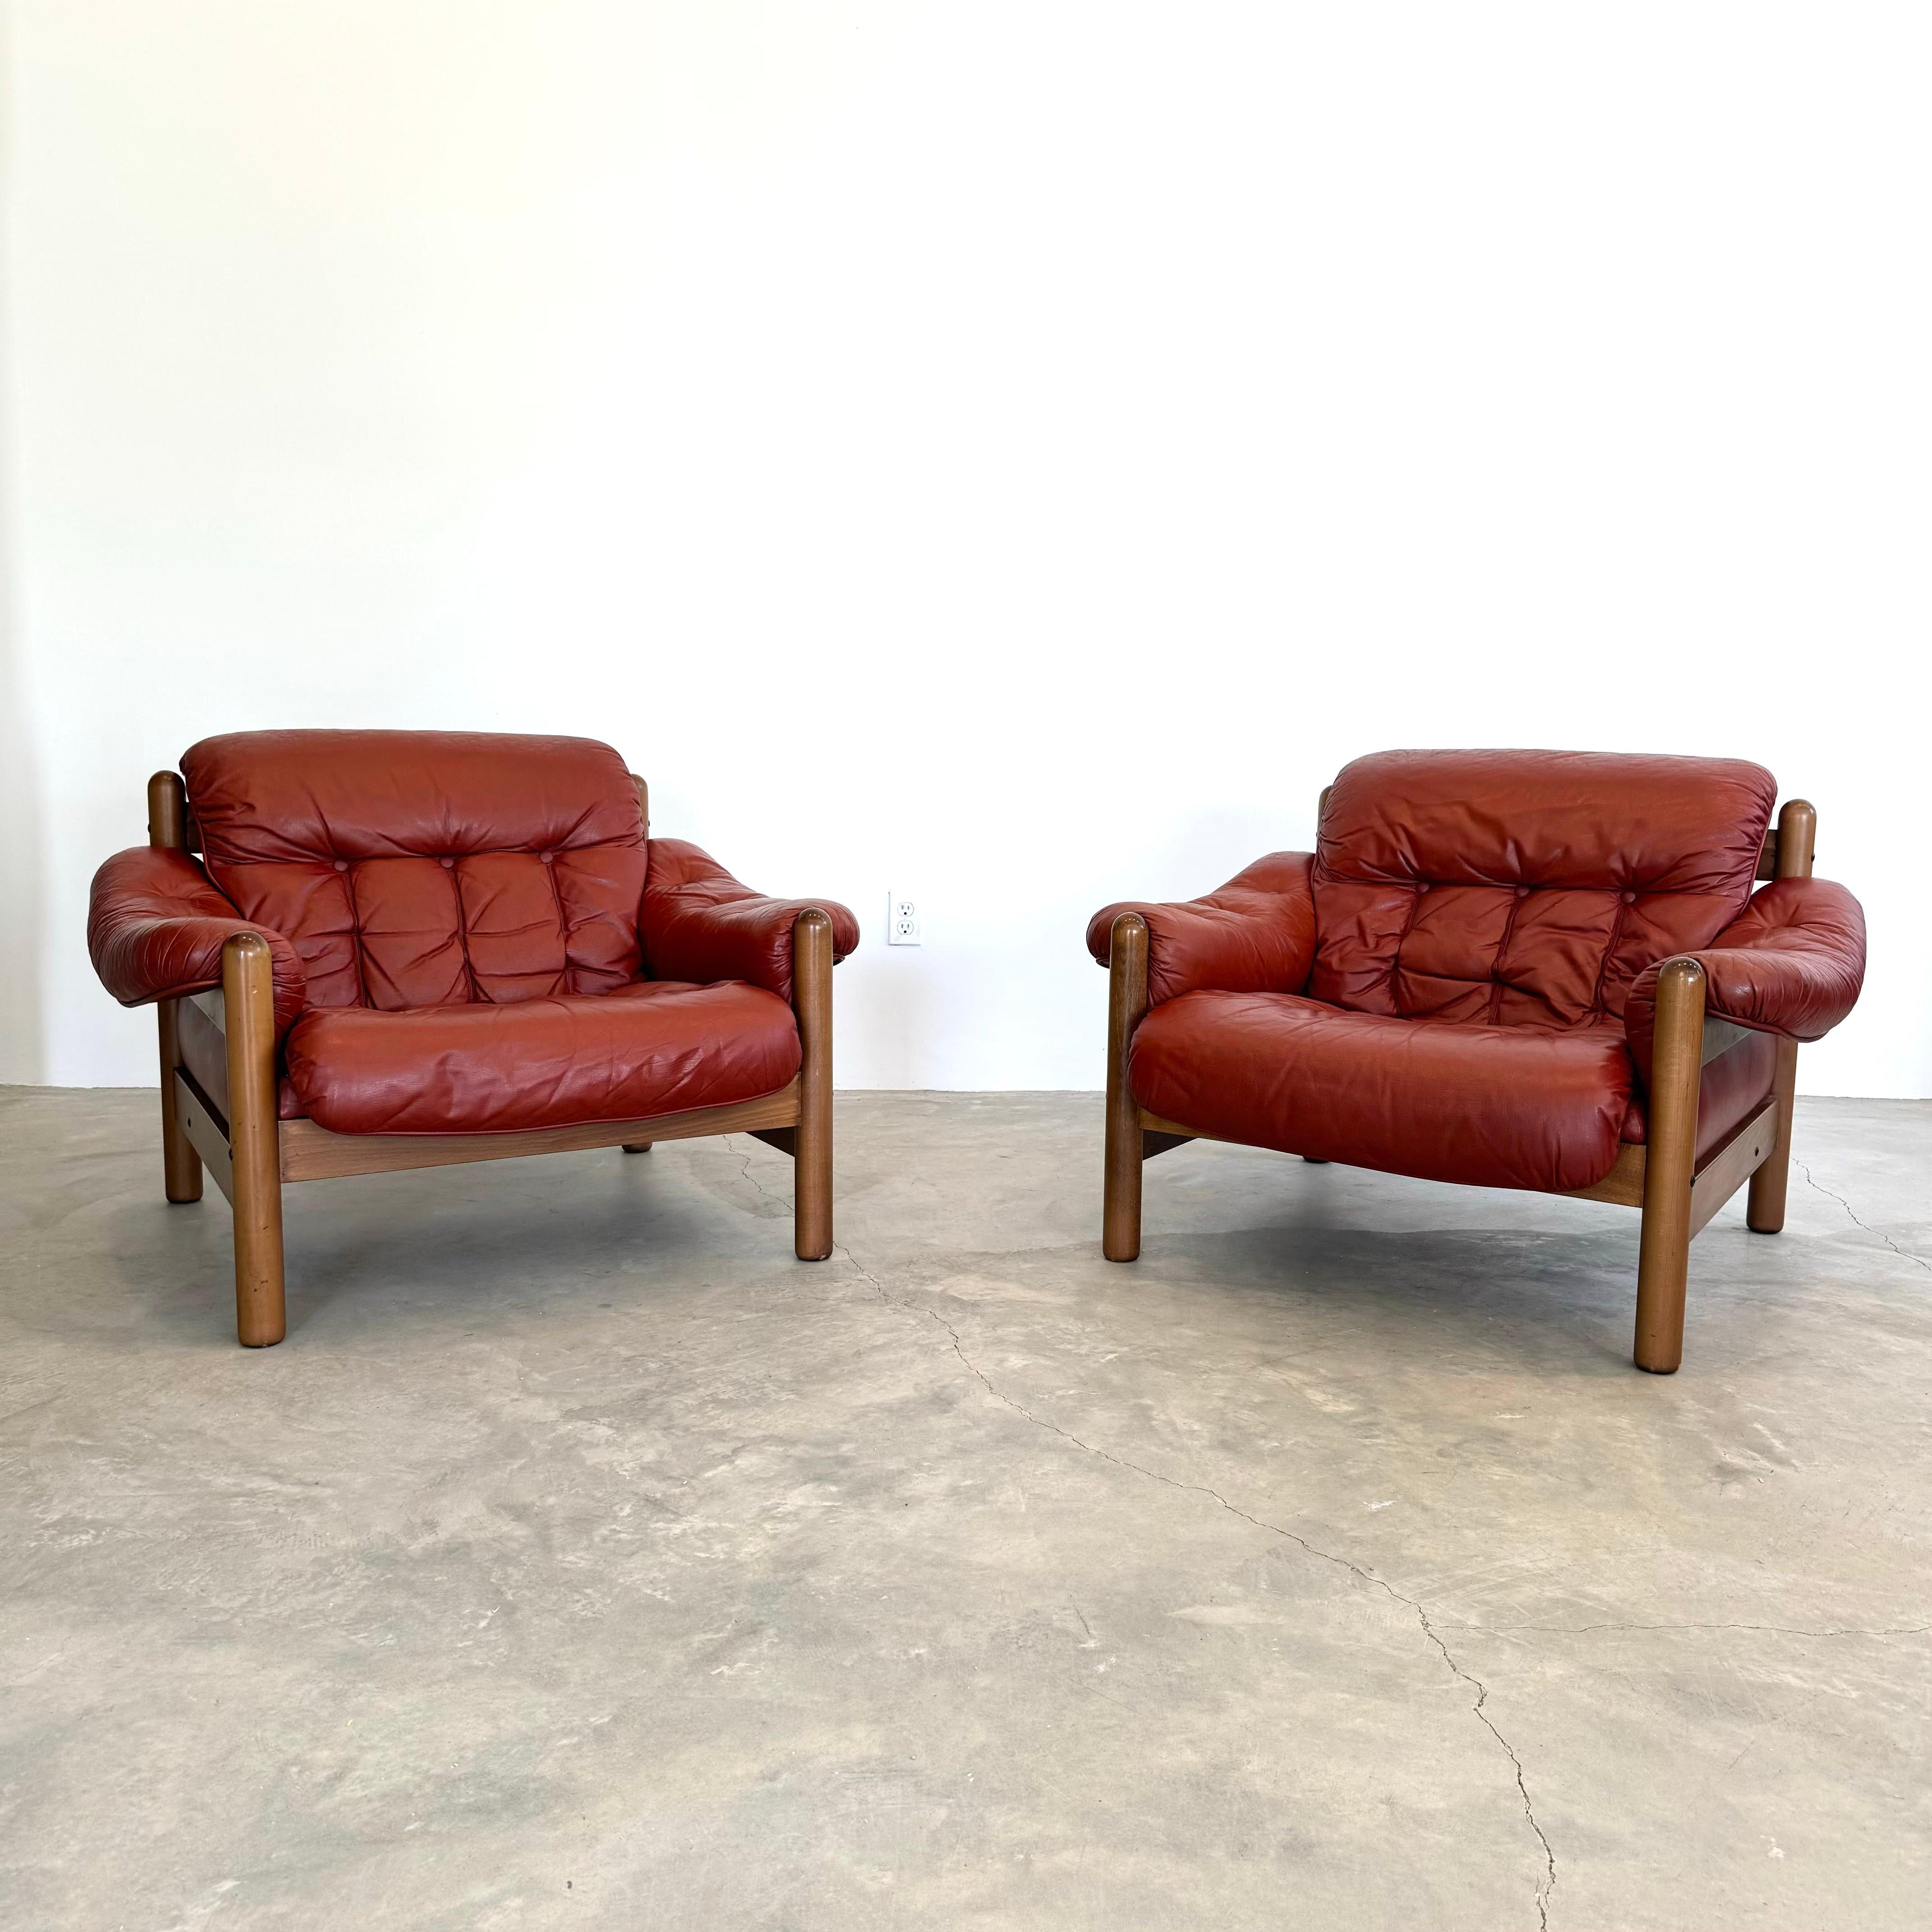 Gorgeous pair of Göte Möbler Nässjö keather and Beech wood Armchairs with a supple oxblood leather upholstery. Beautiful Brazilian style lounge chair with deep seats and a low profile. Extremely comfortable and perfect for adding a little bit of